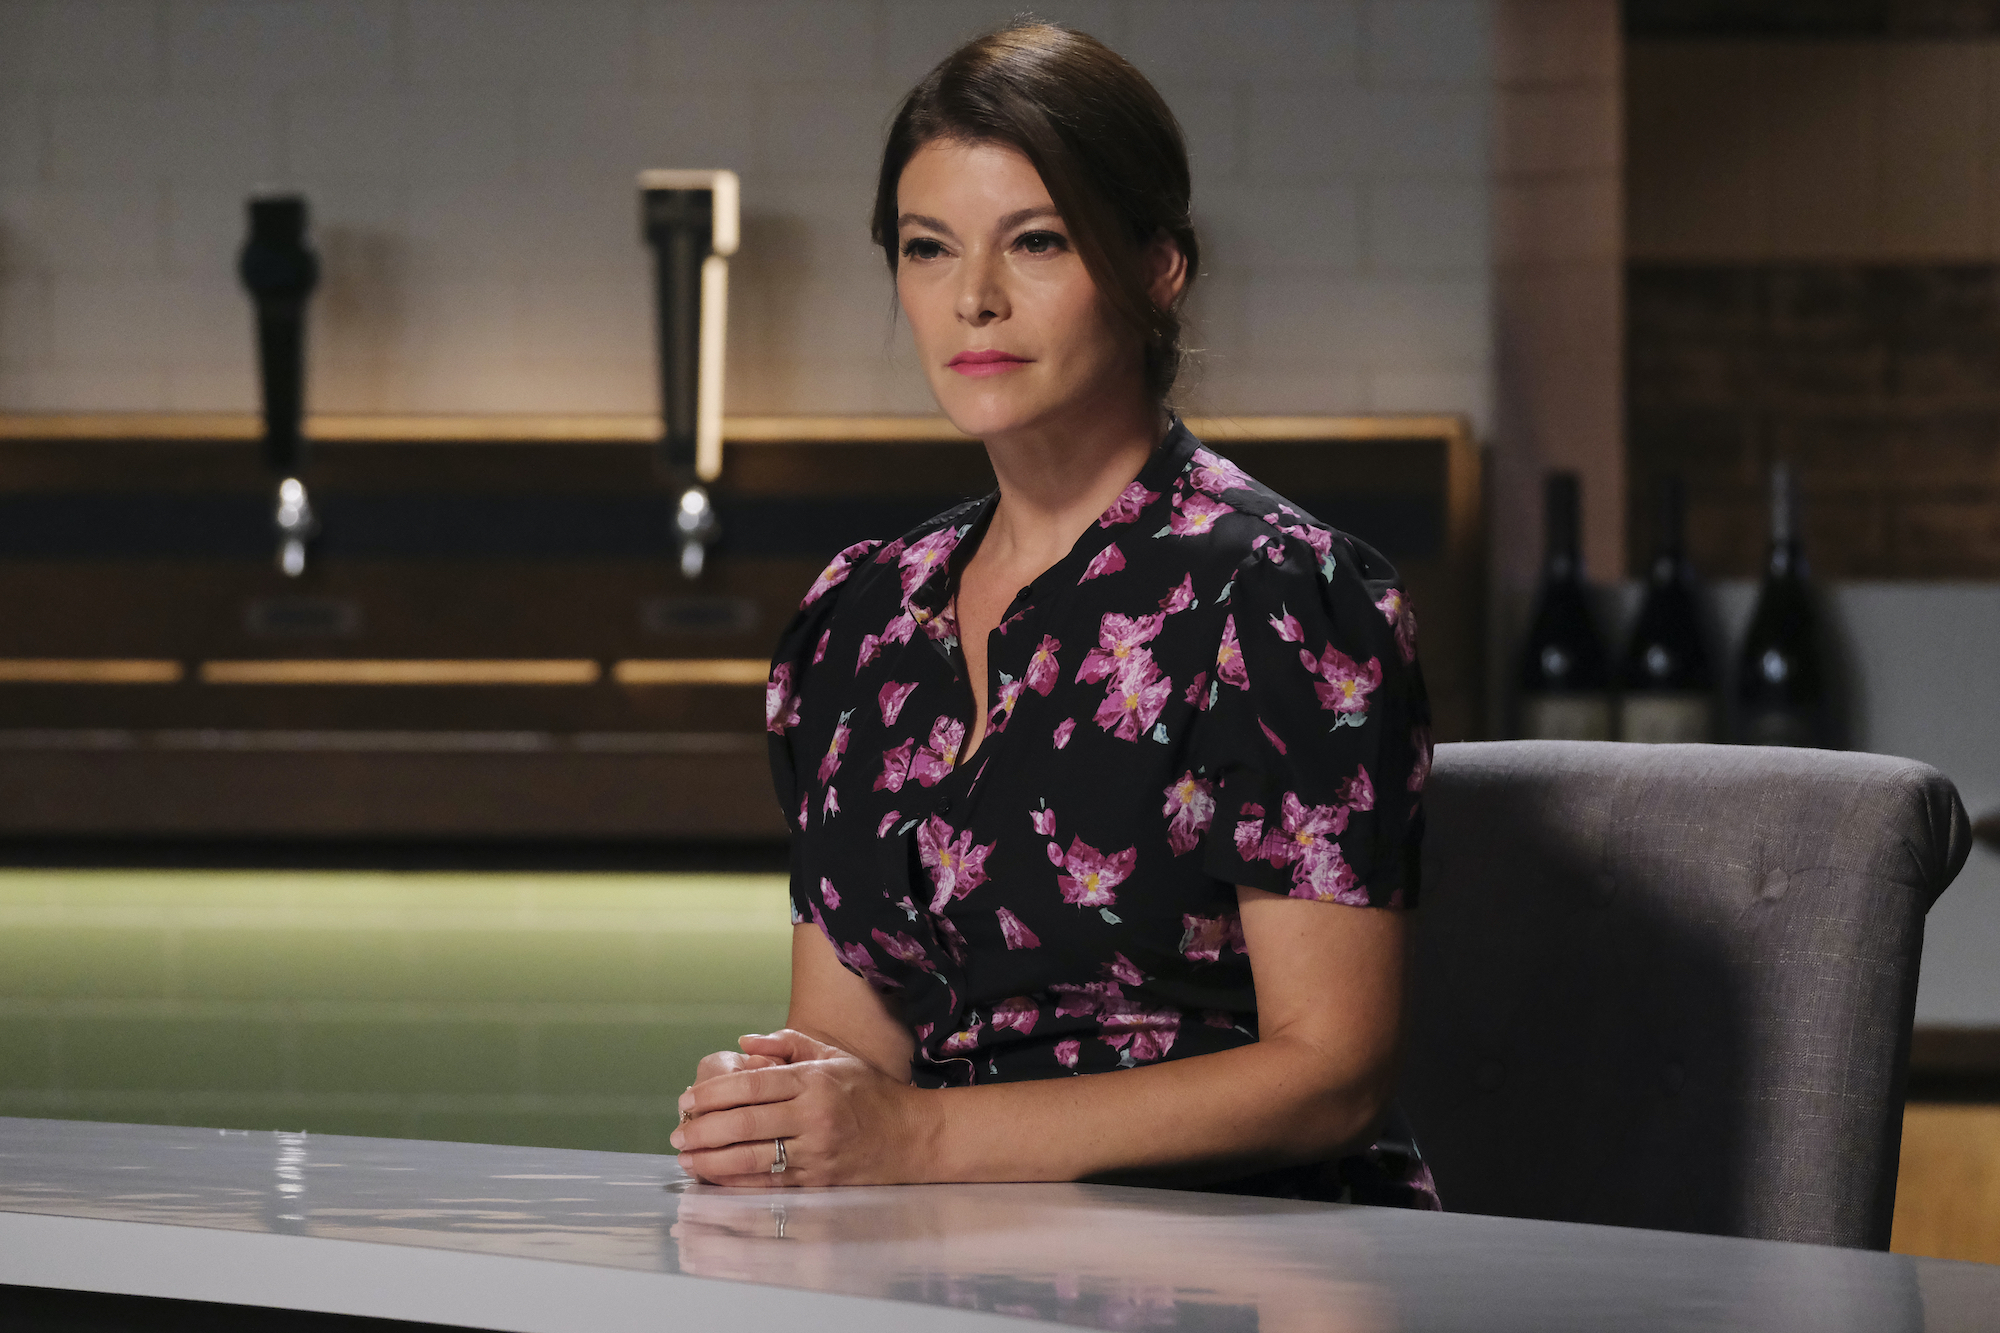 Gail Simmons will be seen in the judges panel